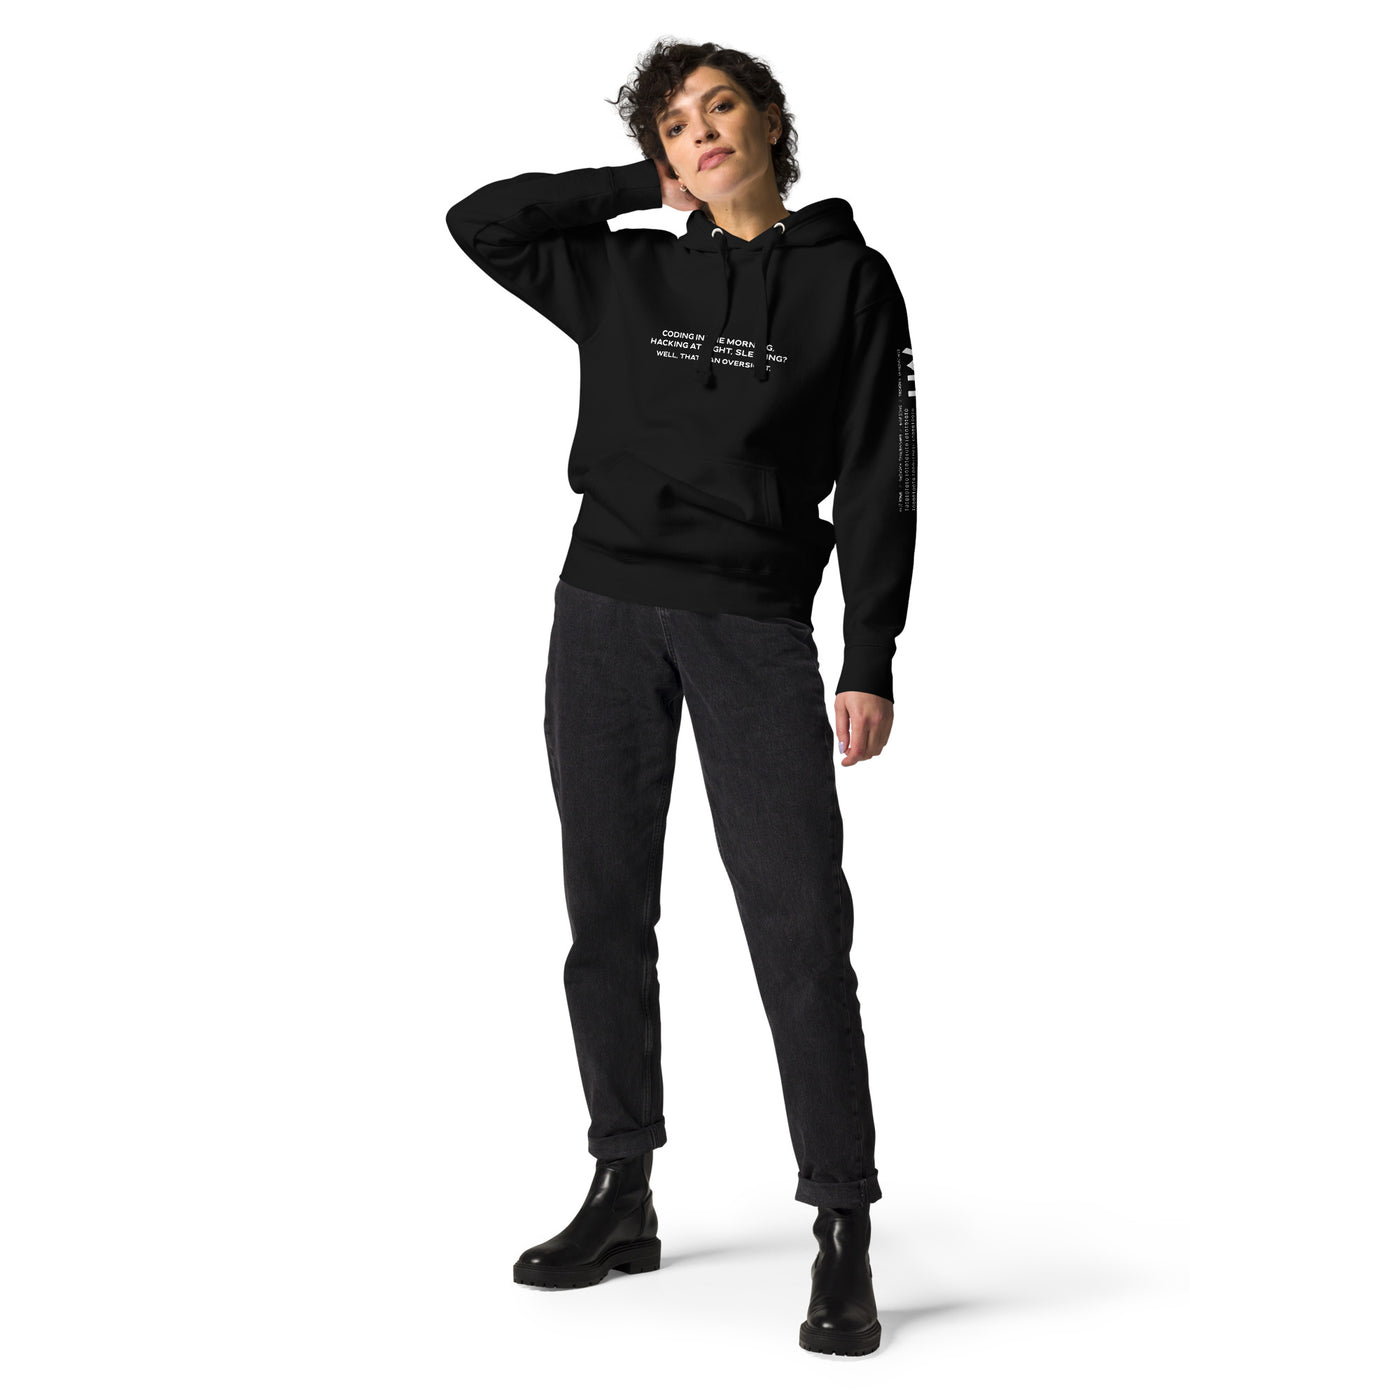 Coding in the morning, hacking at night V2 - Unisex Hoodie